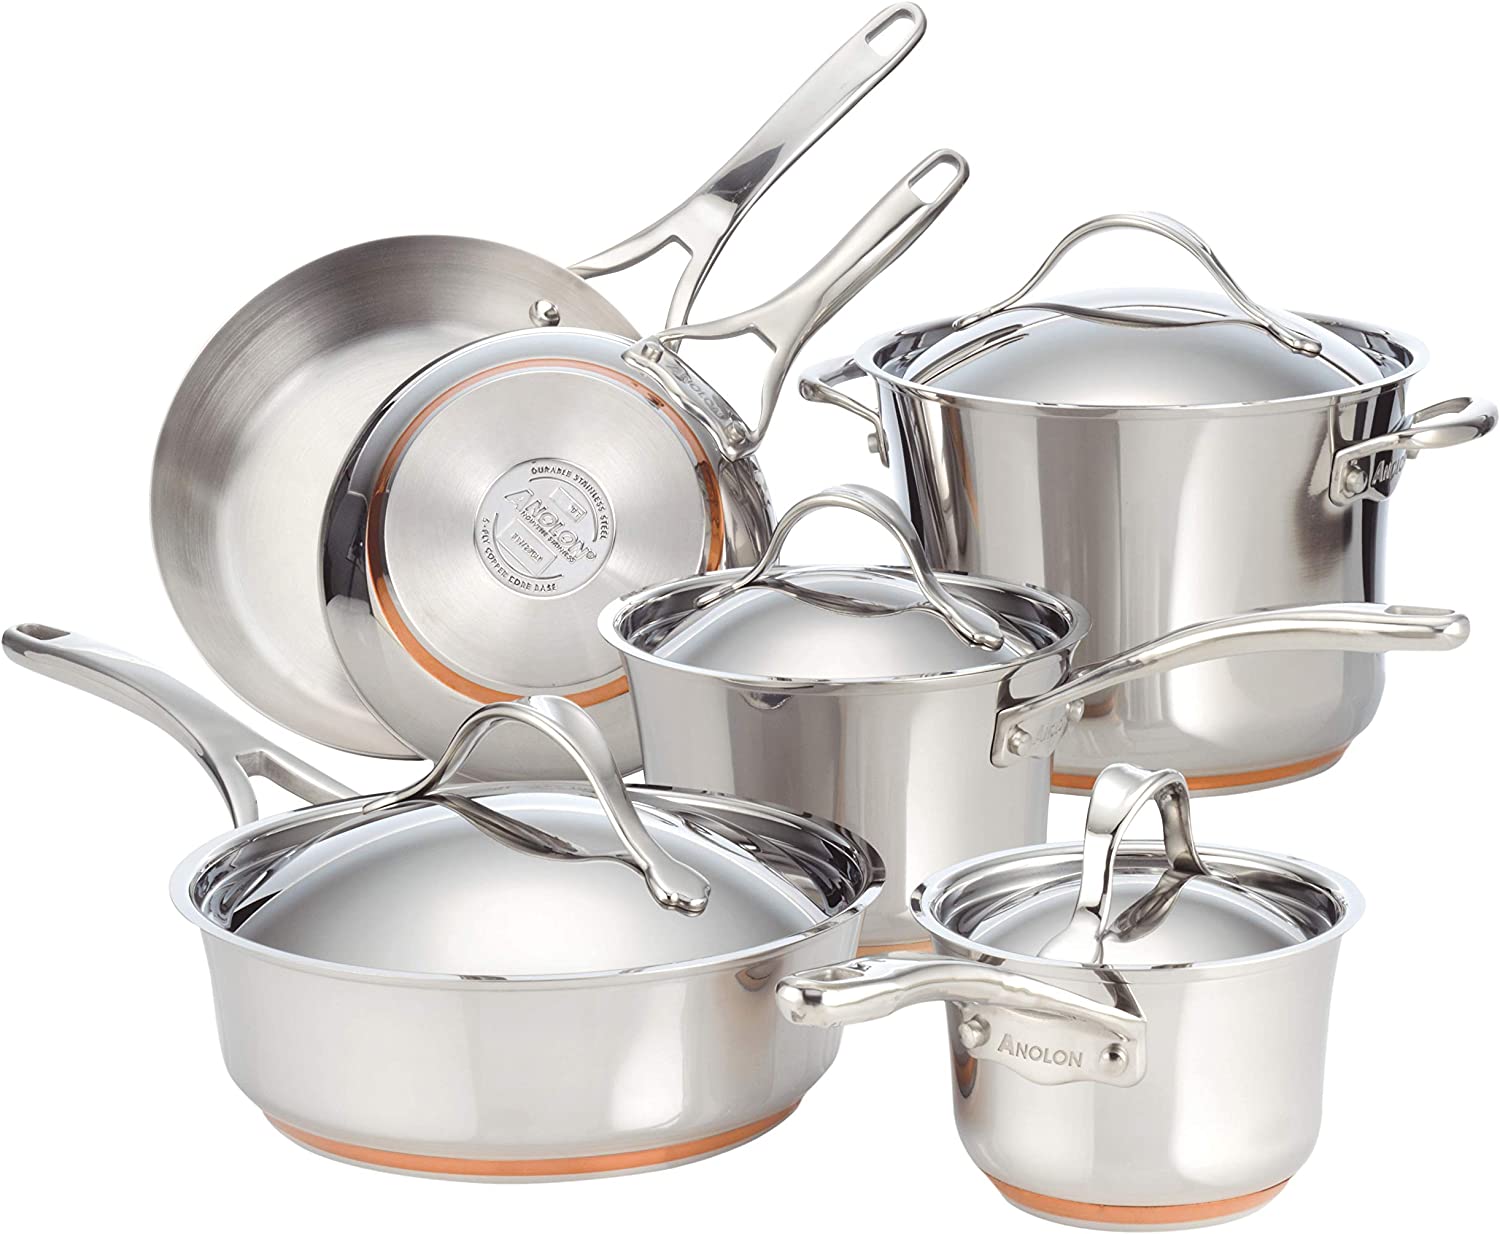 Anolon Nouvelle Stainless Steel Cookware Pots